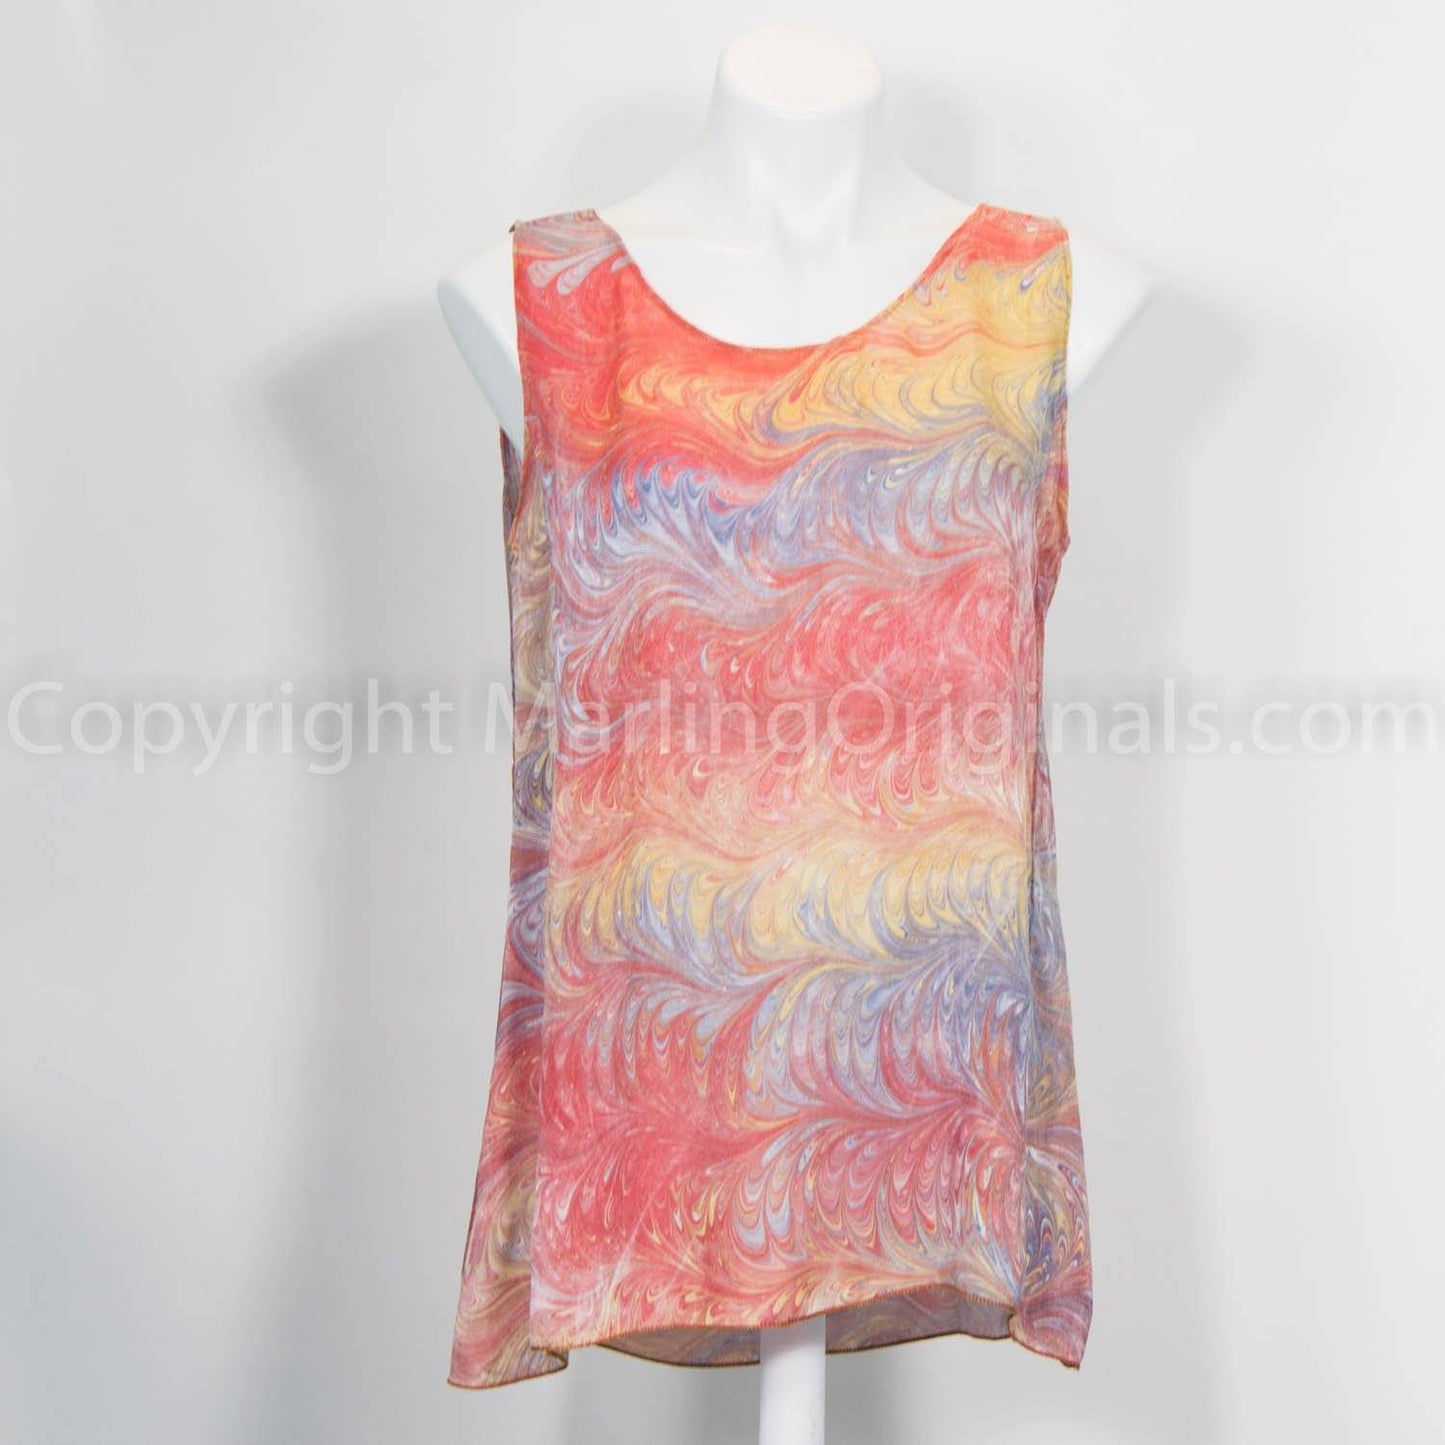 satin marbled silk tank in coral with gold and accents of blue grey